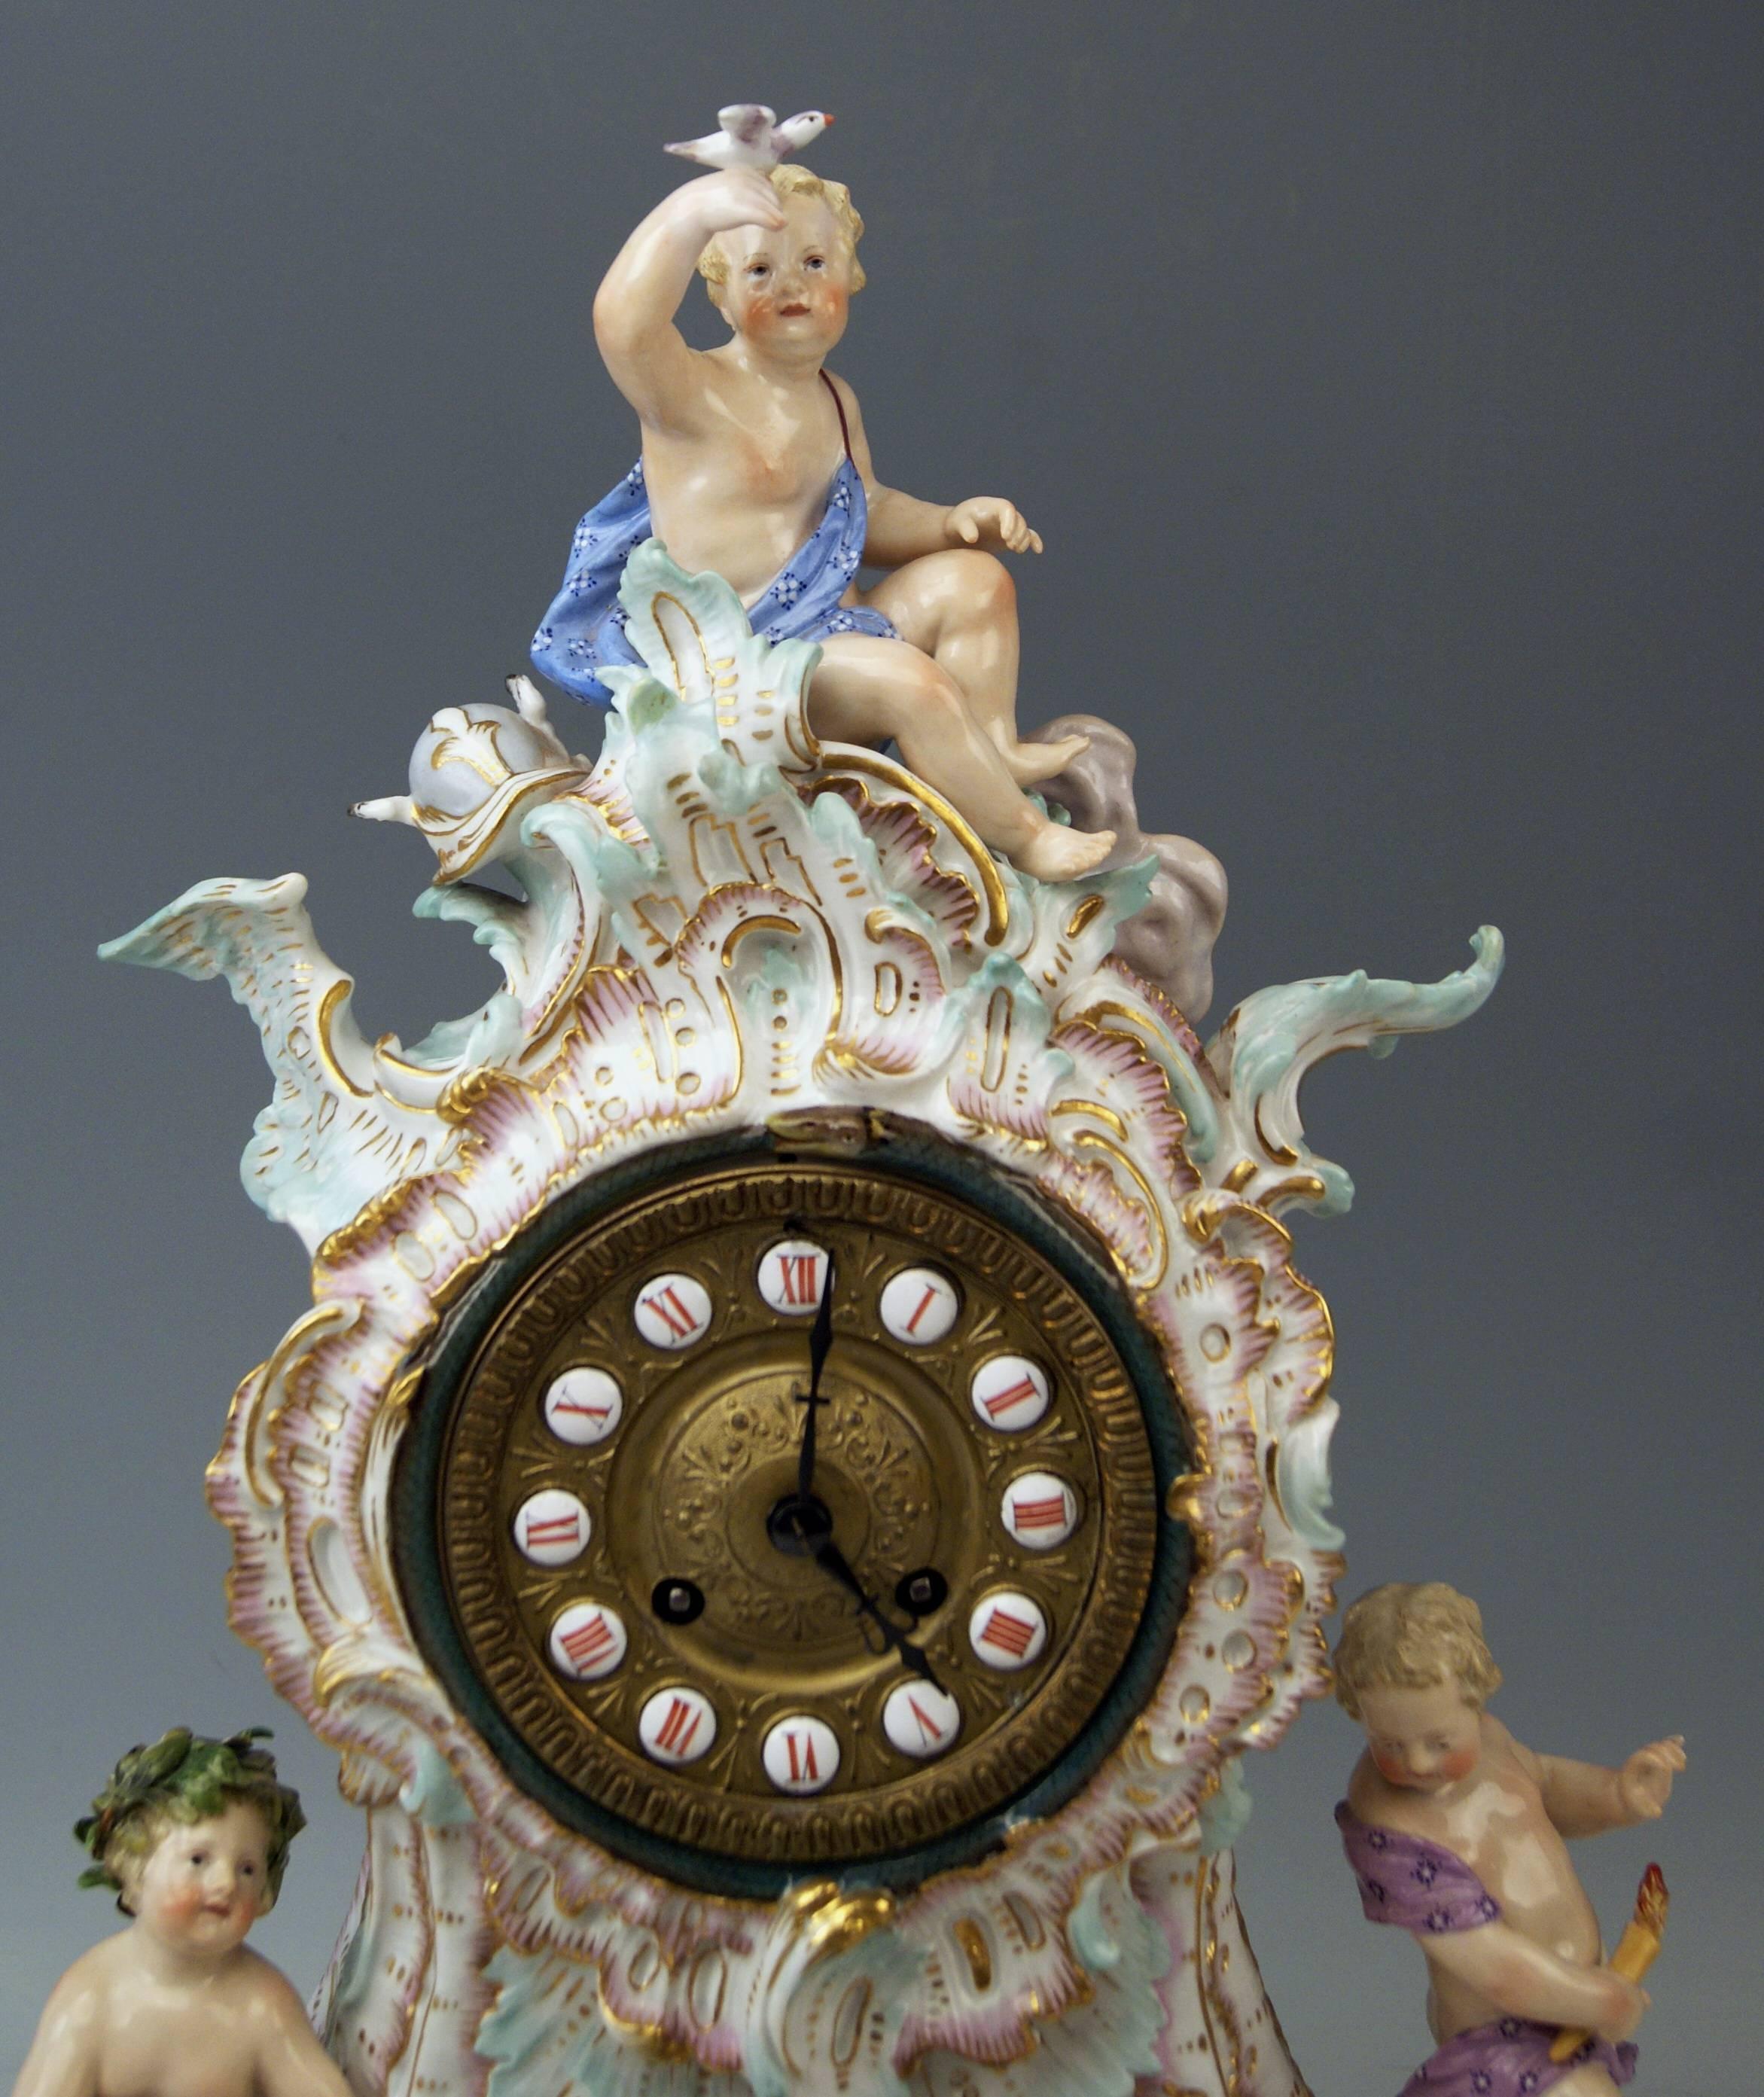 Manufactory: Meissen.
Dating: 19th century / made circa 1860-1870.
Material: White porcelain, glossy finish, finest painting.
Technique: Handmade porcelain.

Detailed description:
Meissen gorgeous table clock of finest manufacturing.

This